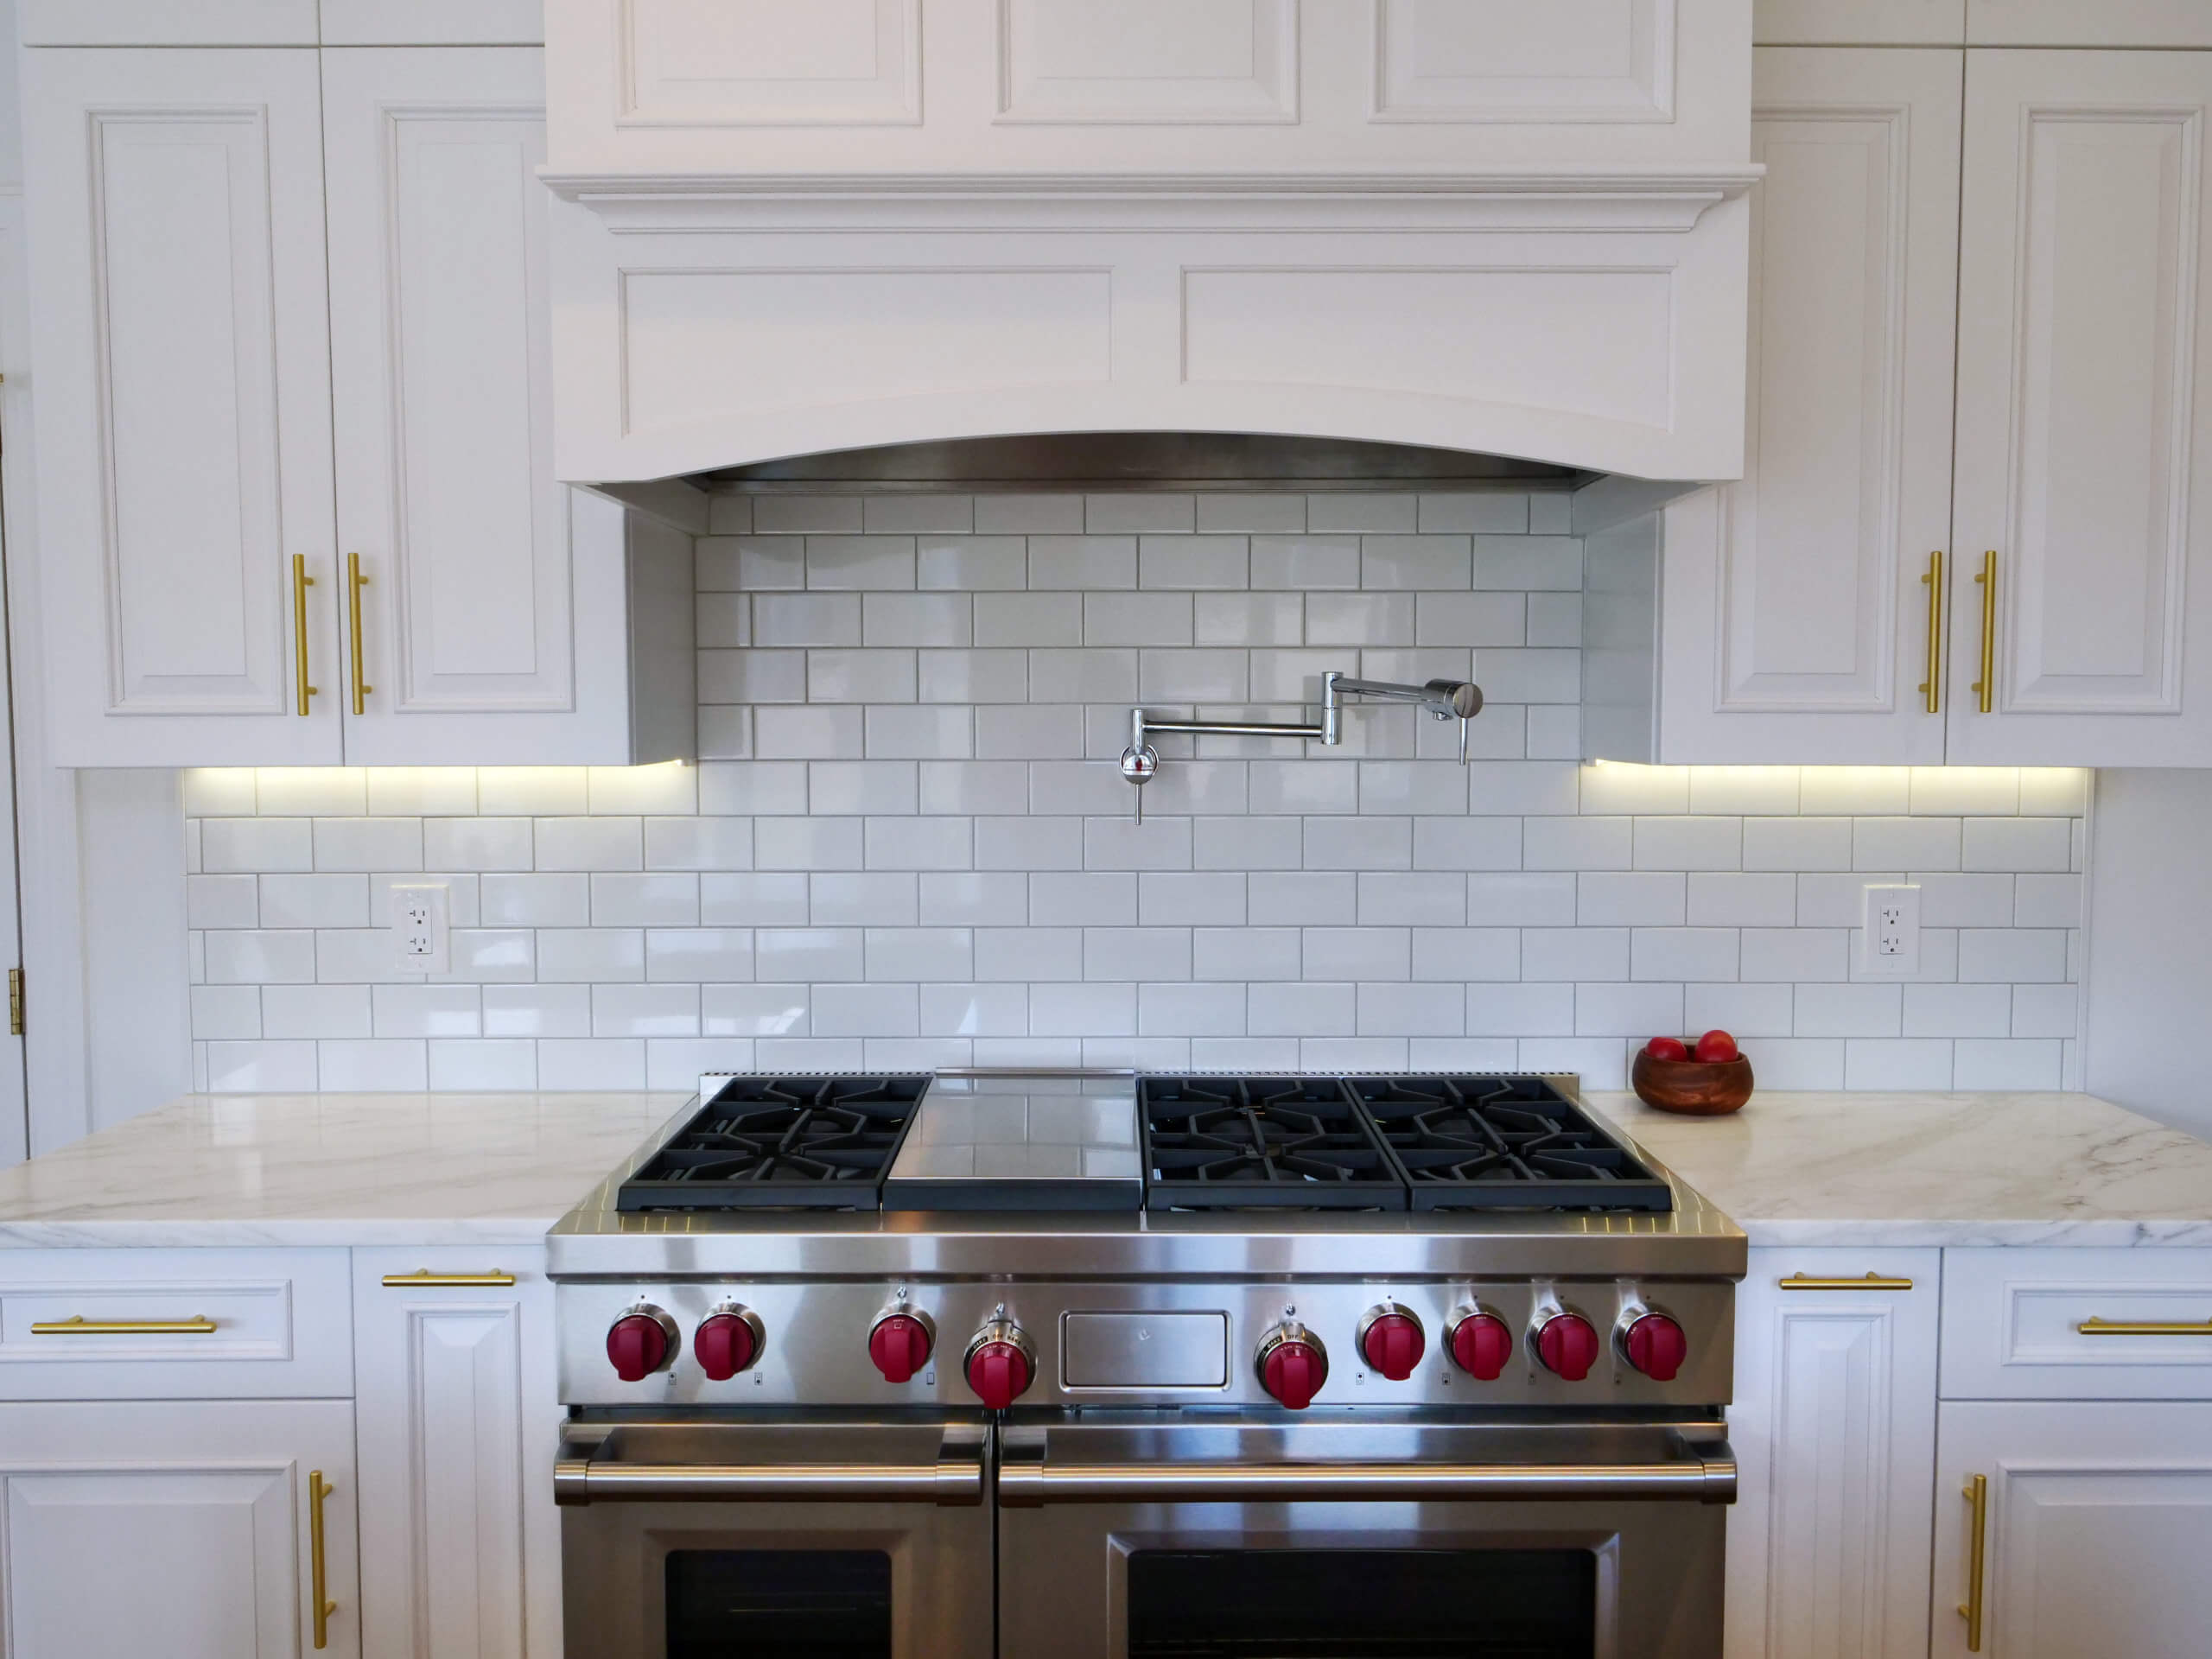 burner and Marble white counters and cabinets in newly remodeled kitchen